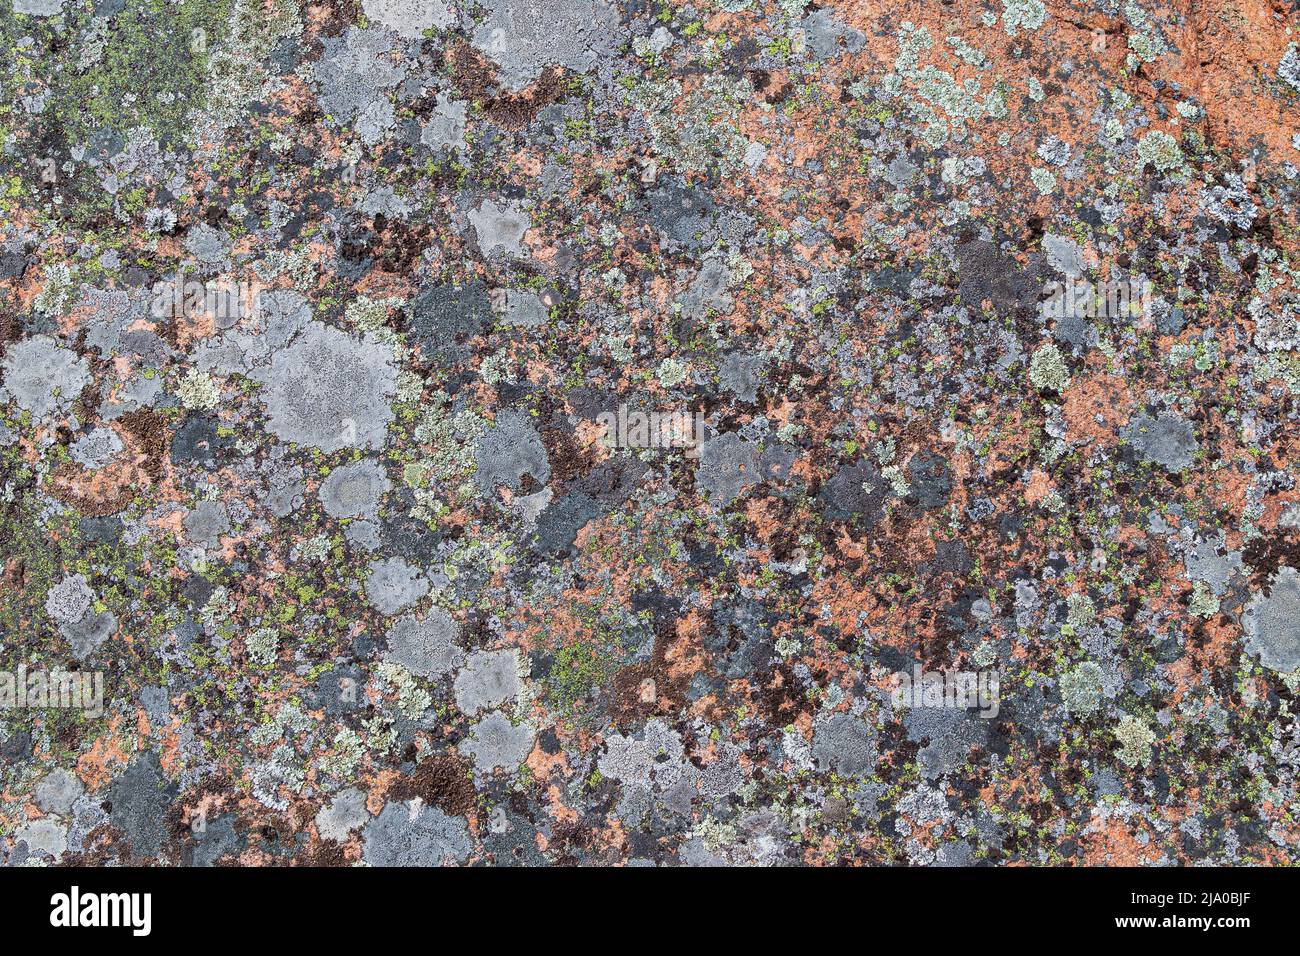 Close-up of different lichens on a red granite rock. Abstract high resolution full frame textured natural background. Stock Photo